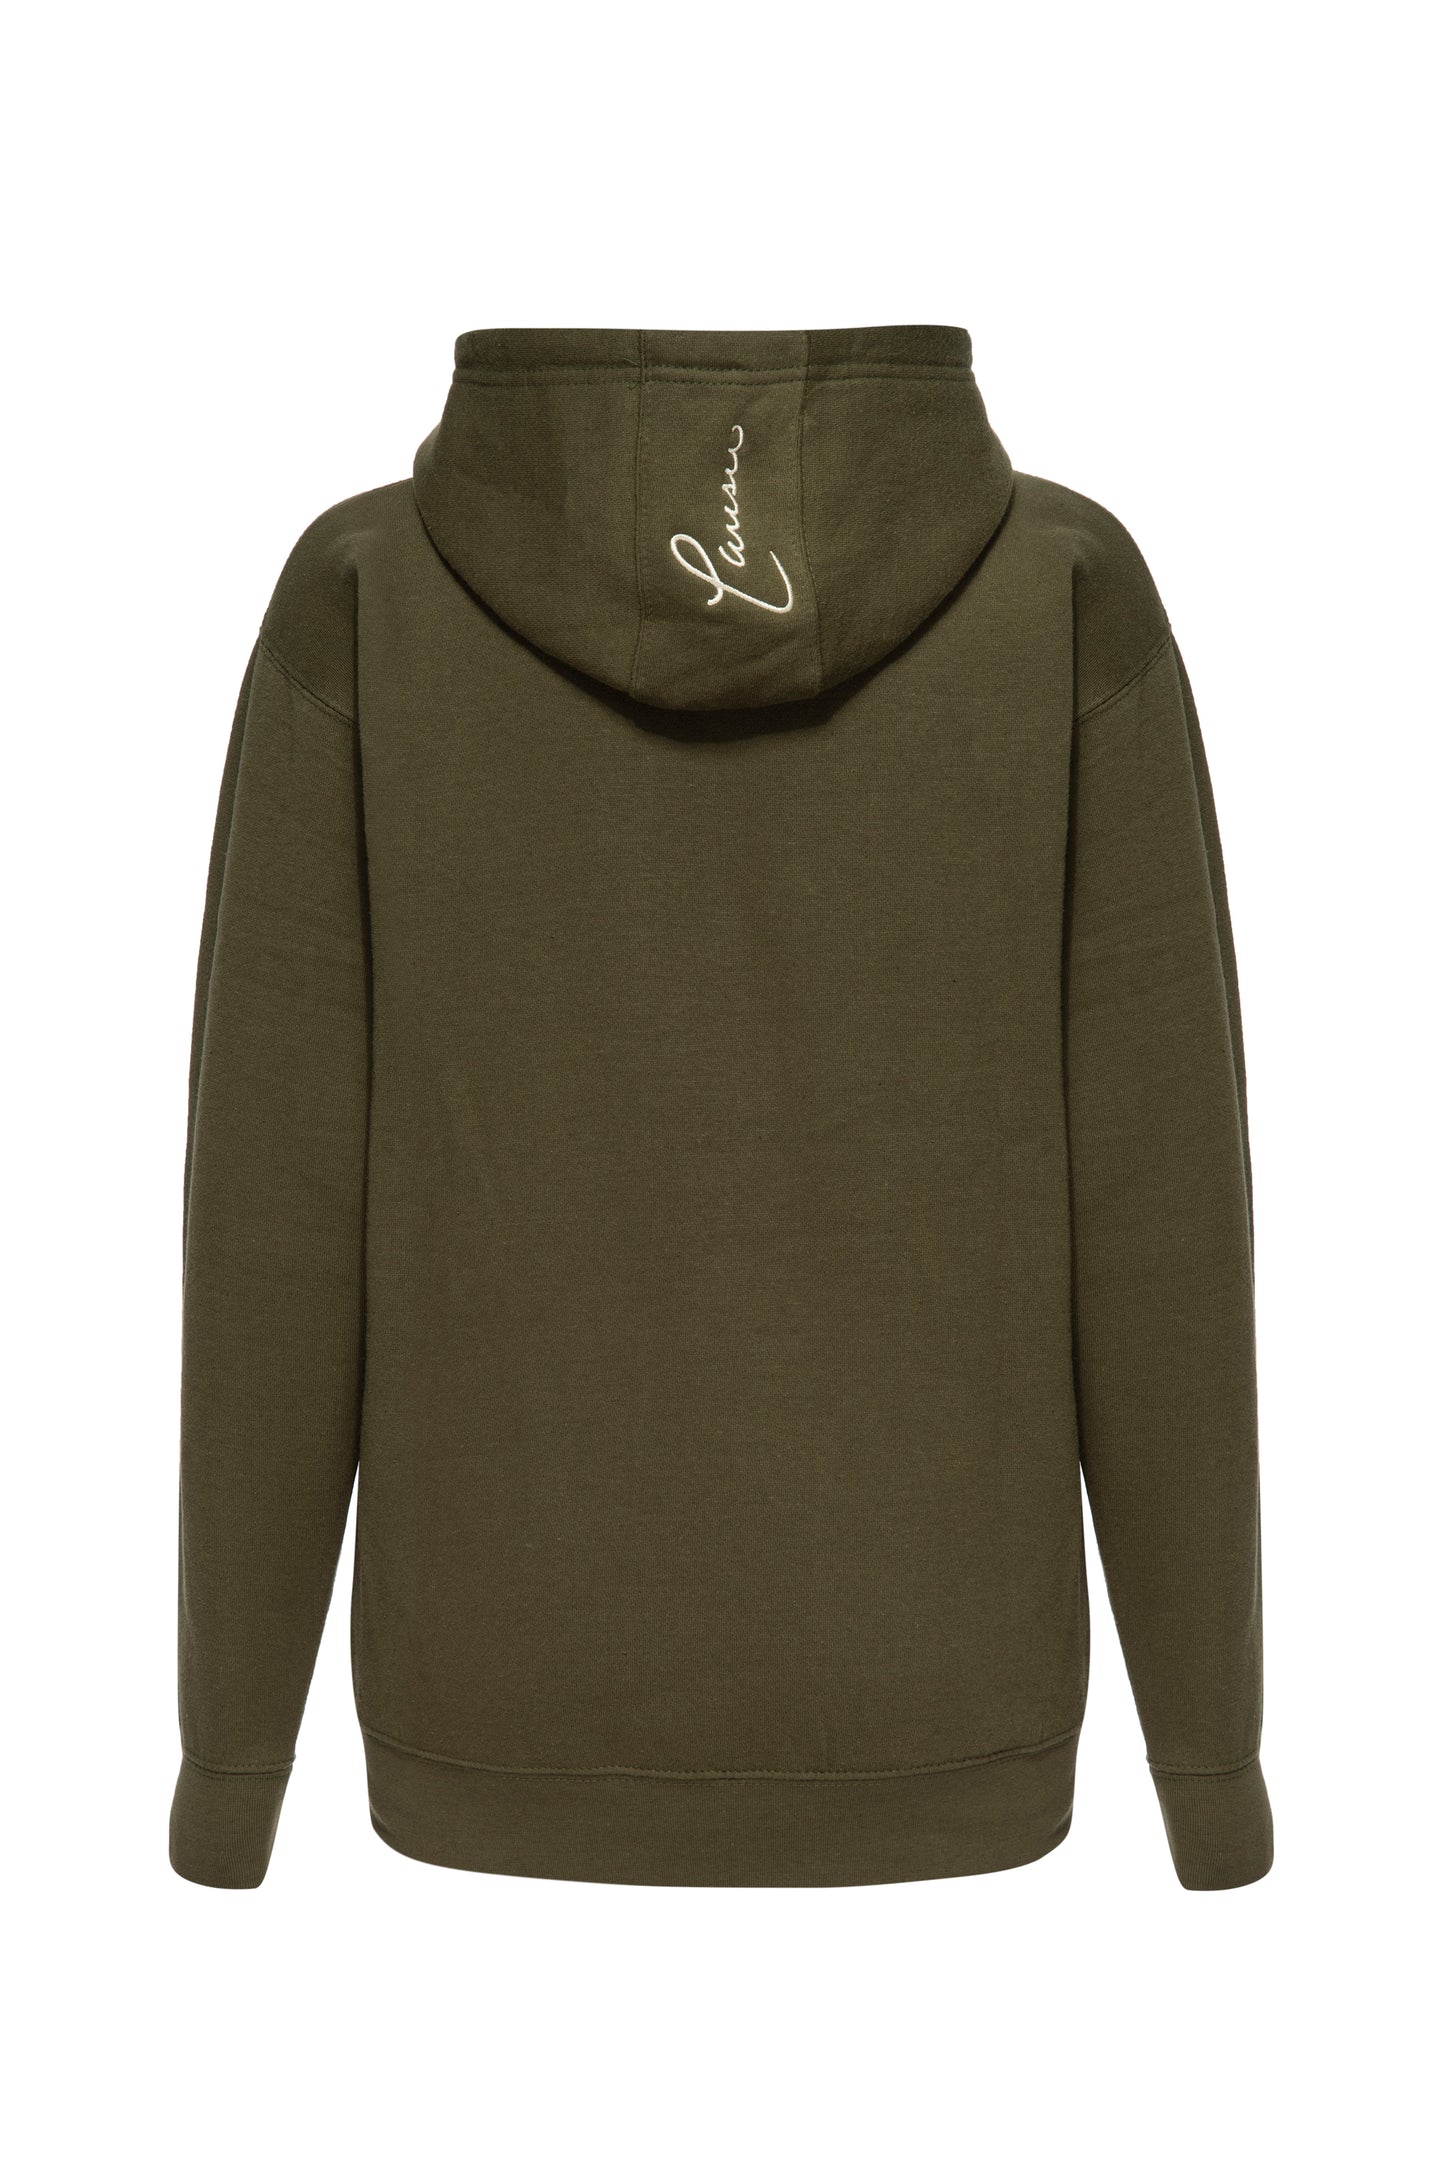 Signature Olive Gold Chord Hoodie - L